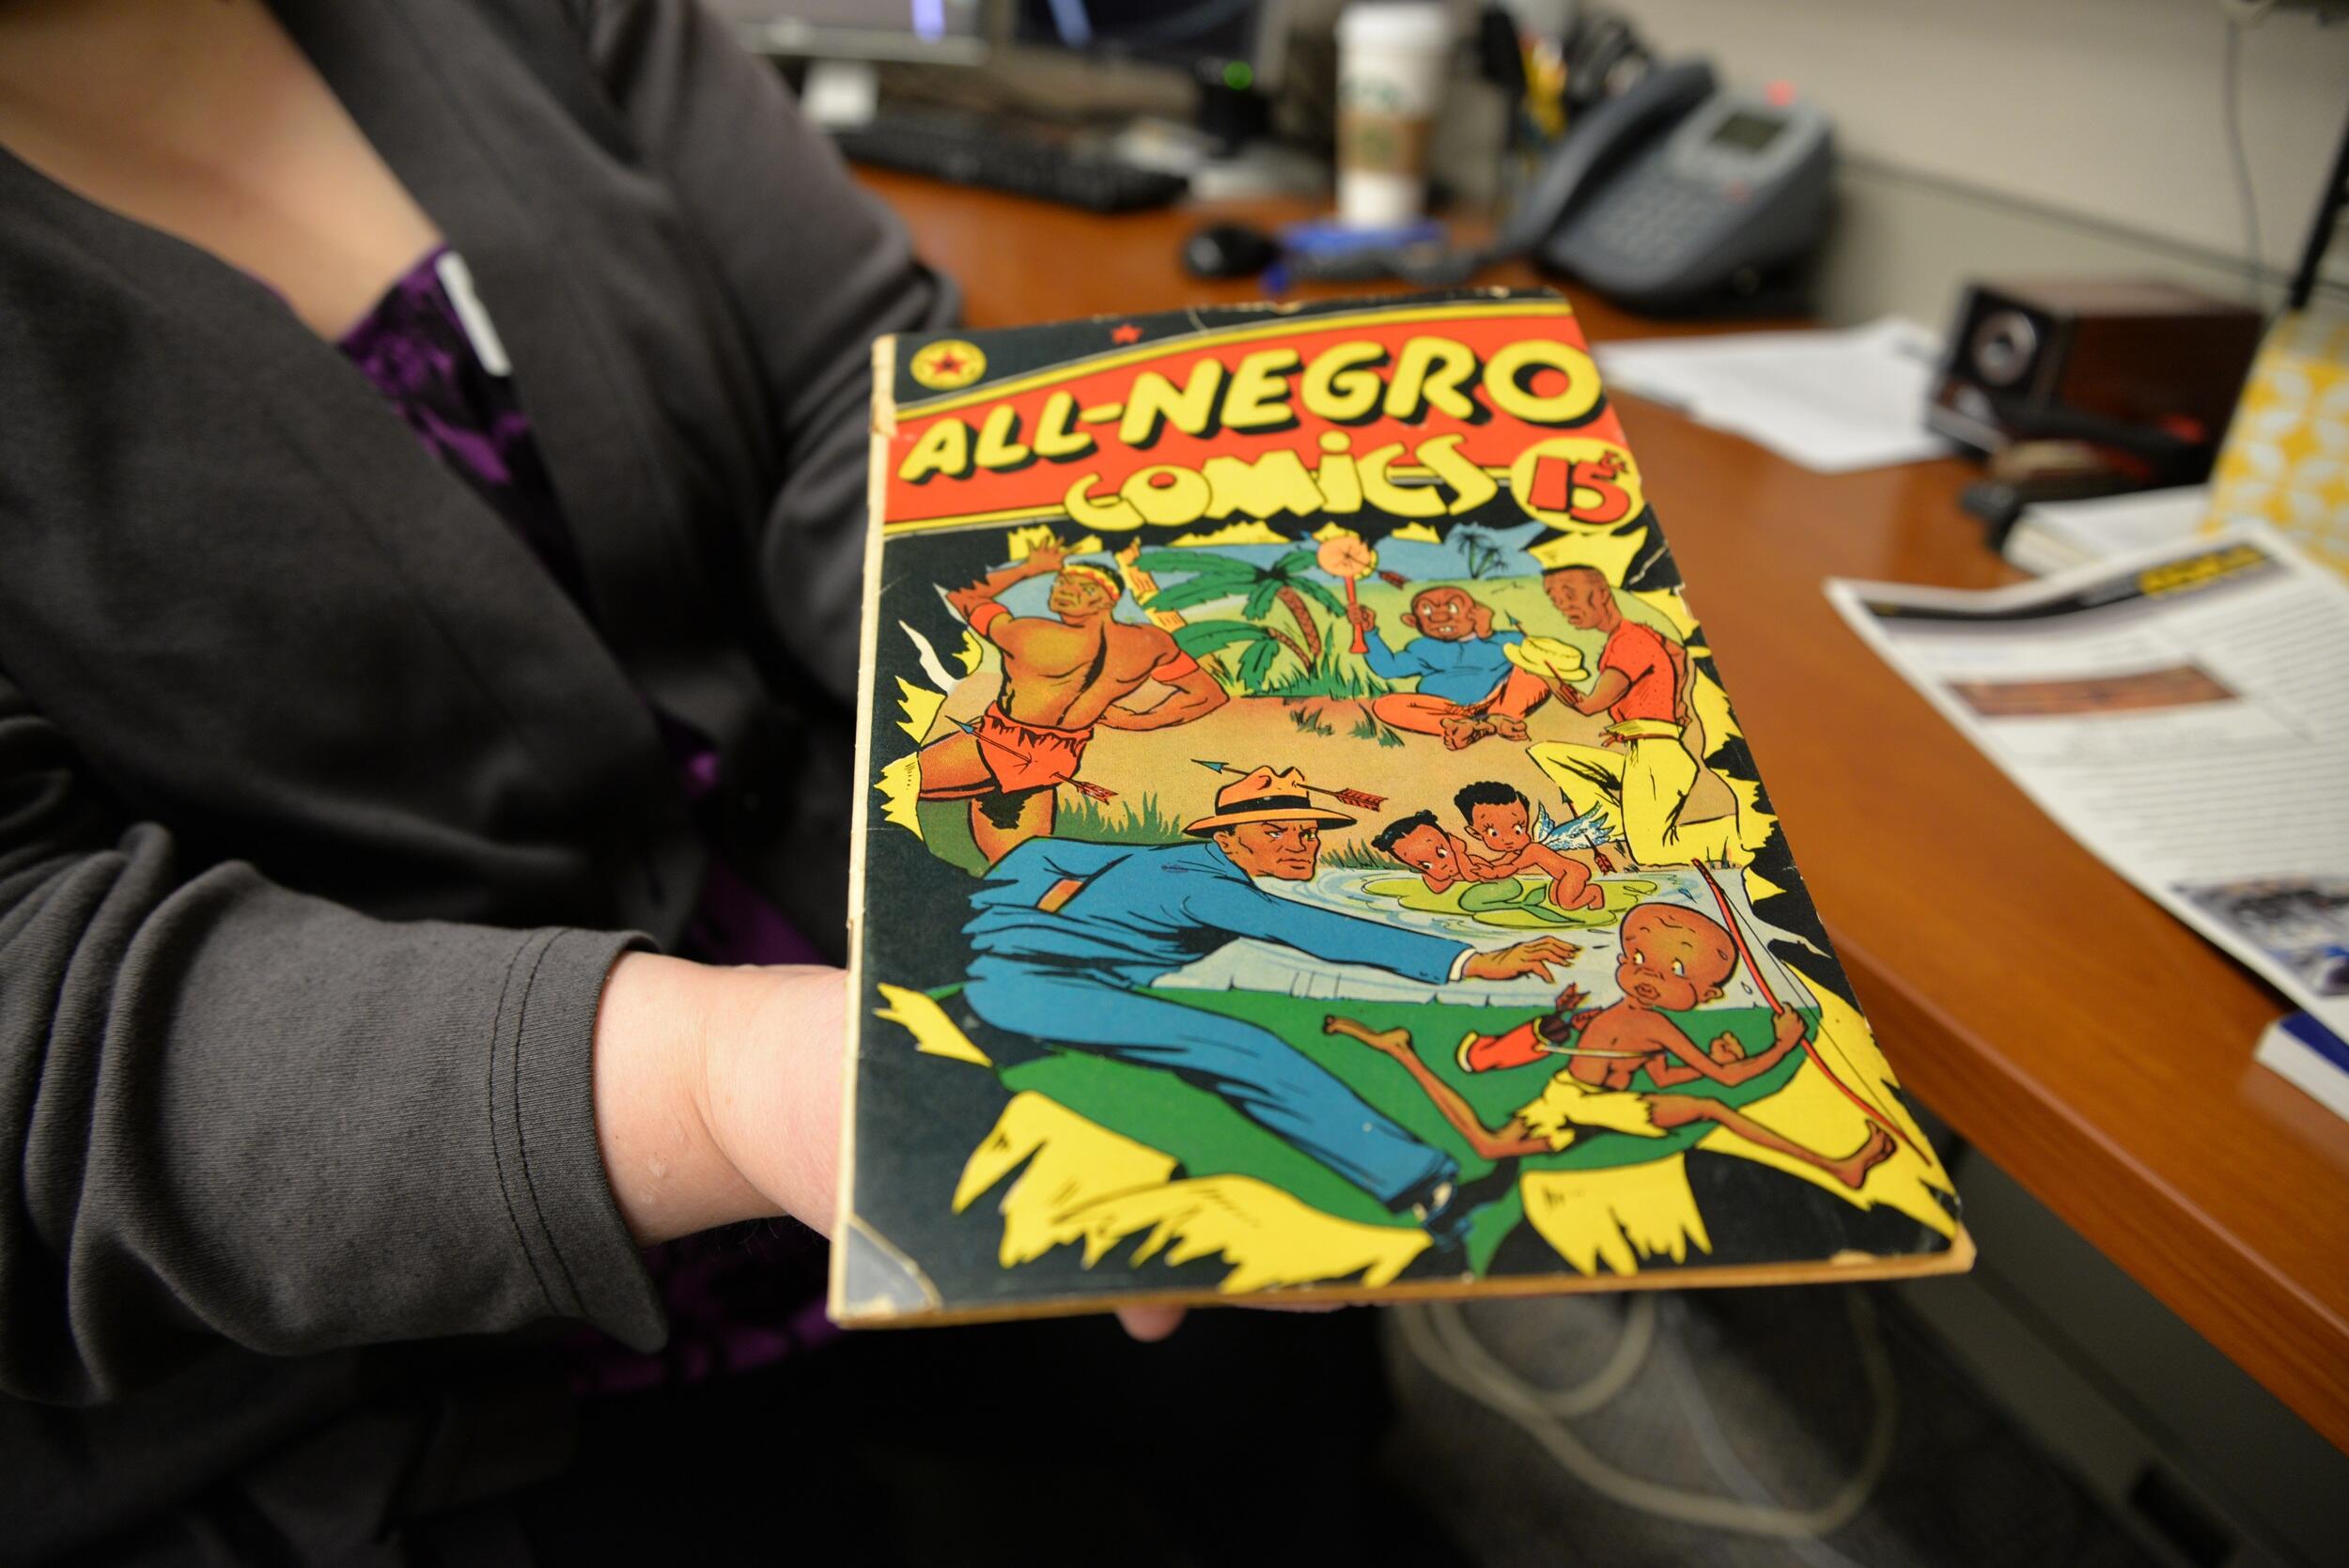 A photo ot a person holding out a comic book to show it. The cover says \"ALL-NEGRO cominics\" and has an image of a man chasing after a child.